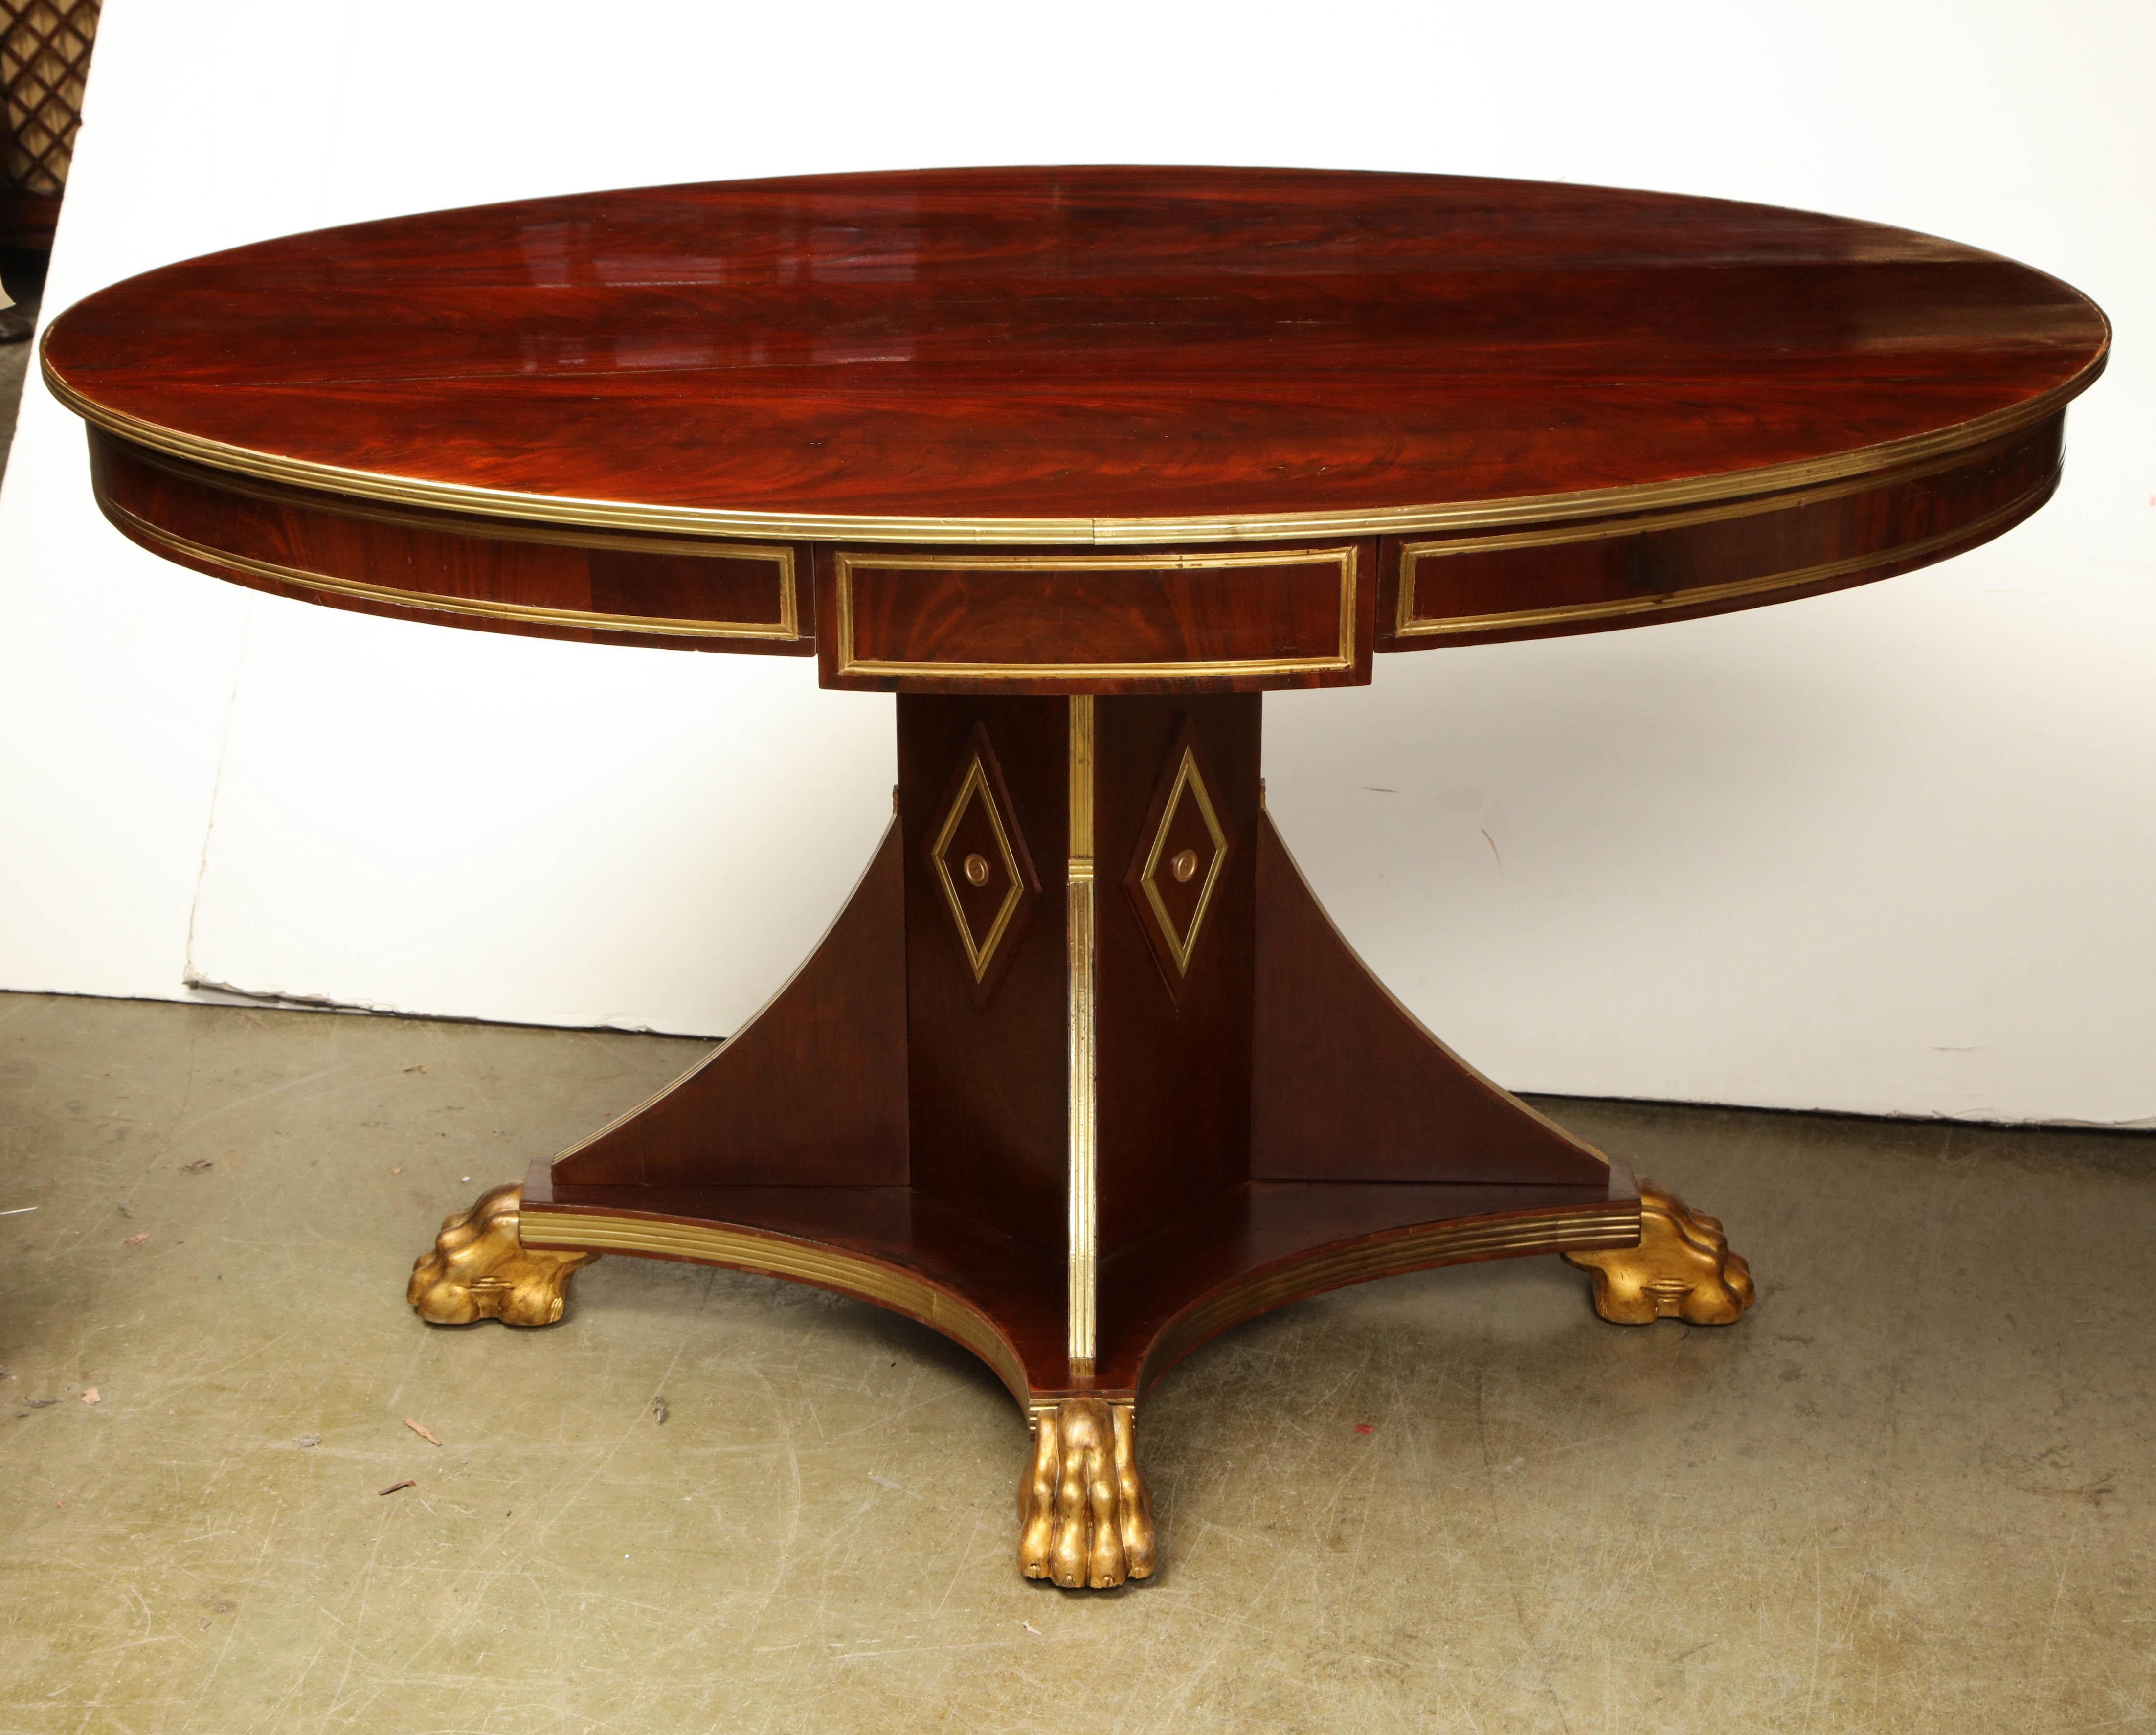 An unusual Russian neoclassic mahogany oval center table with brass trim and on a parcel-gilt paw foot pedestal base.